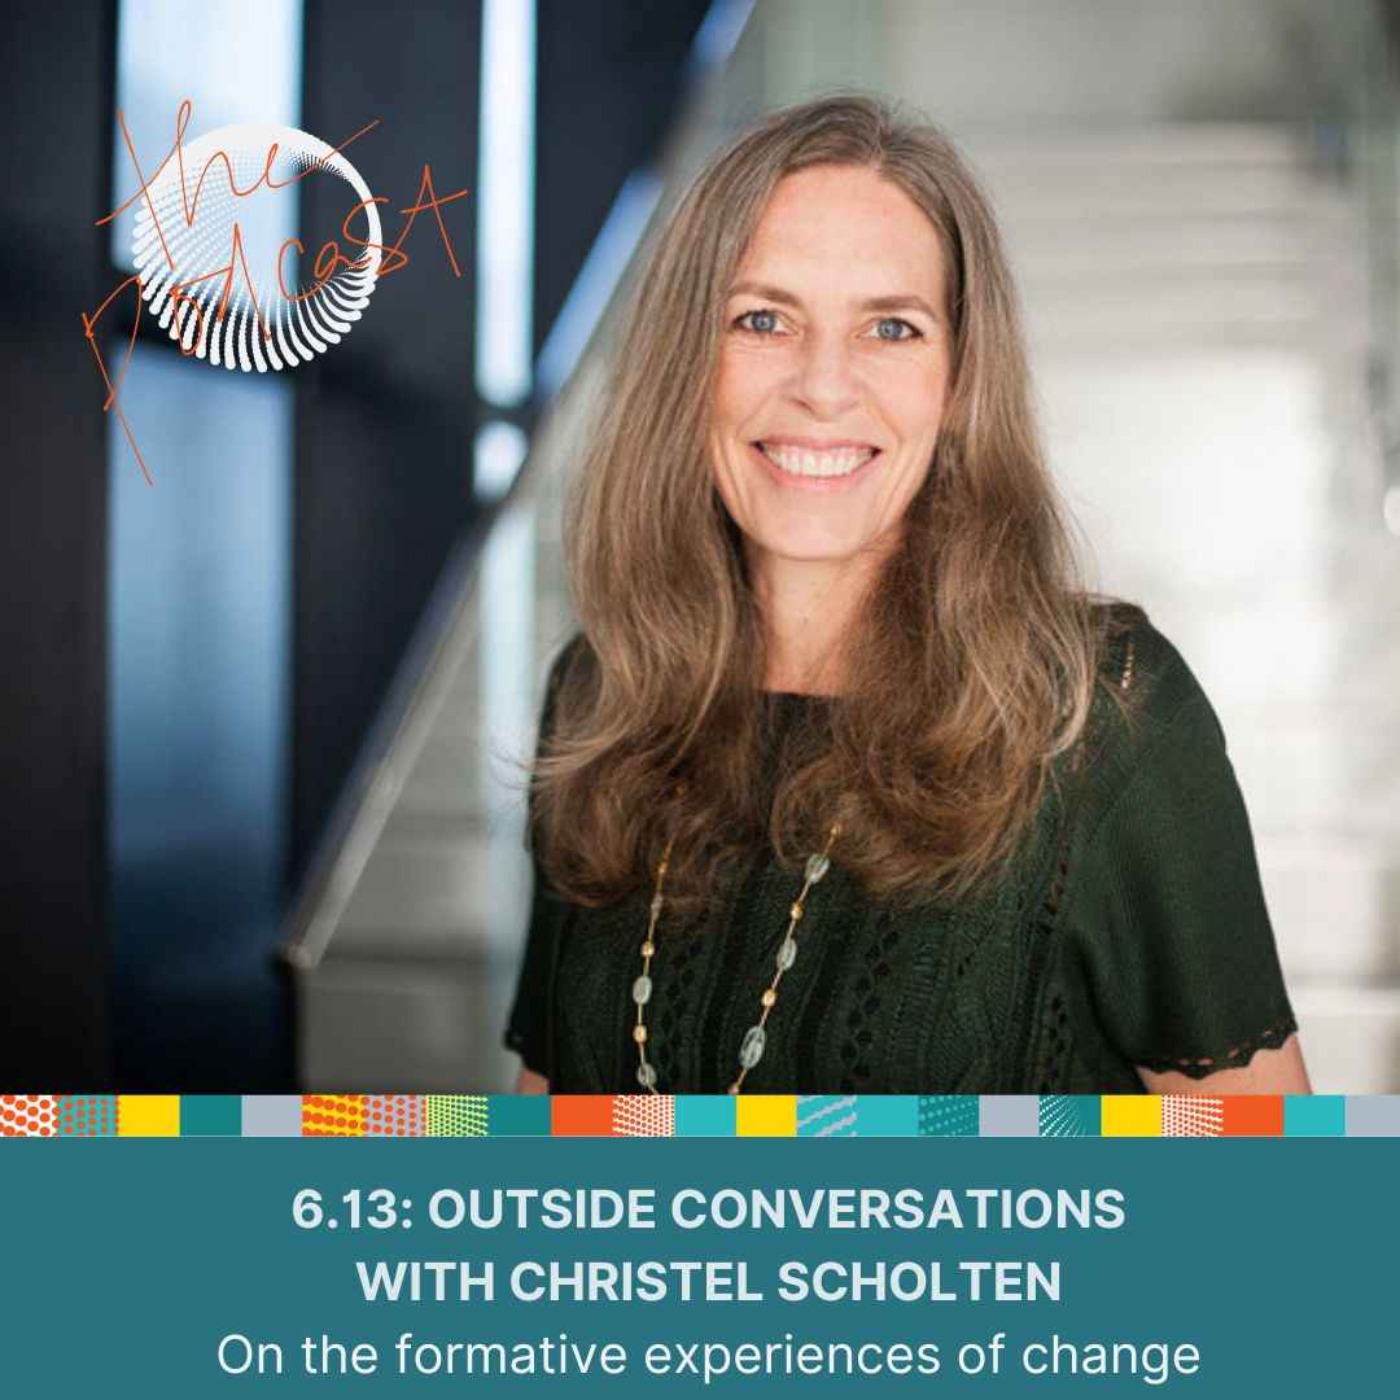 6.13: Outside Conversations with Christel Scholten